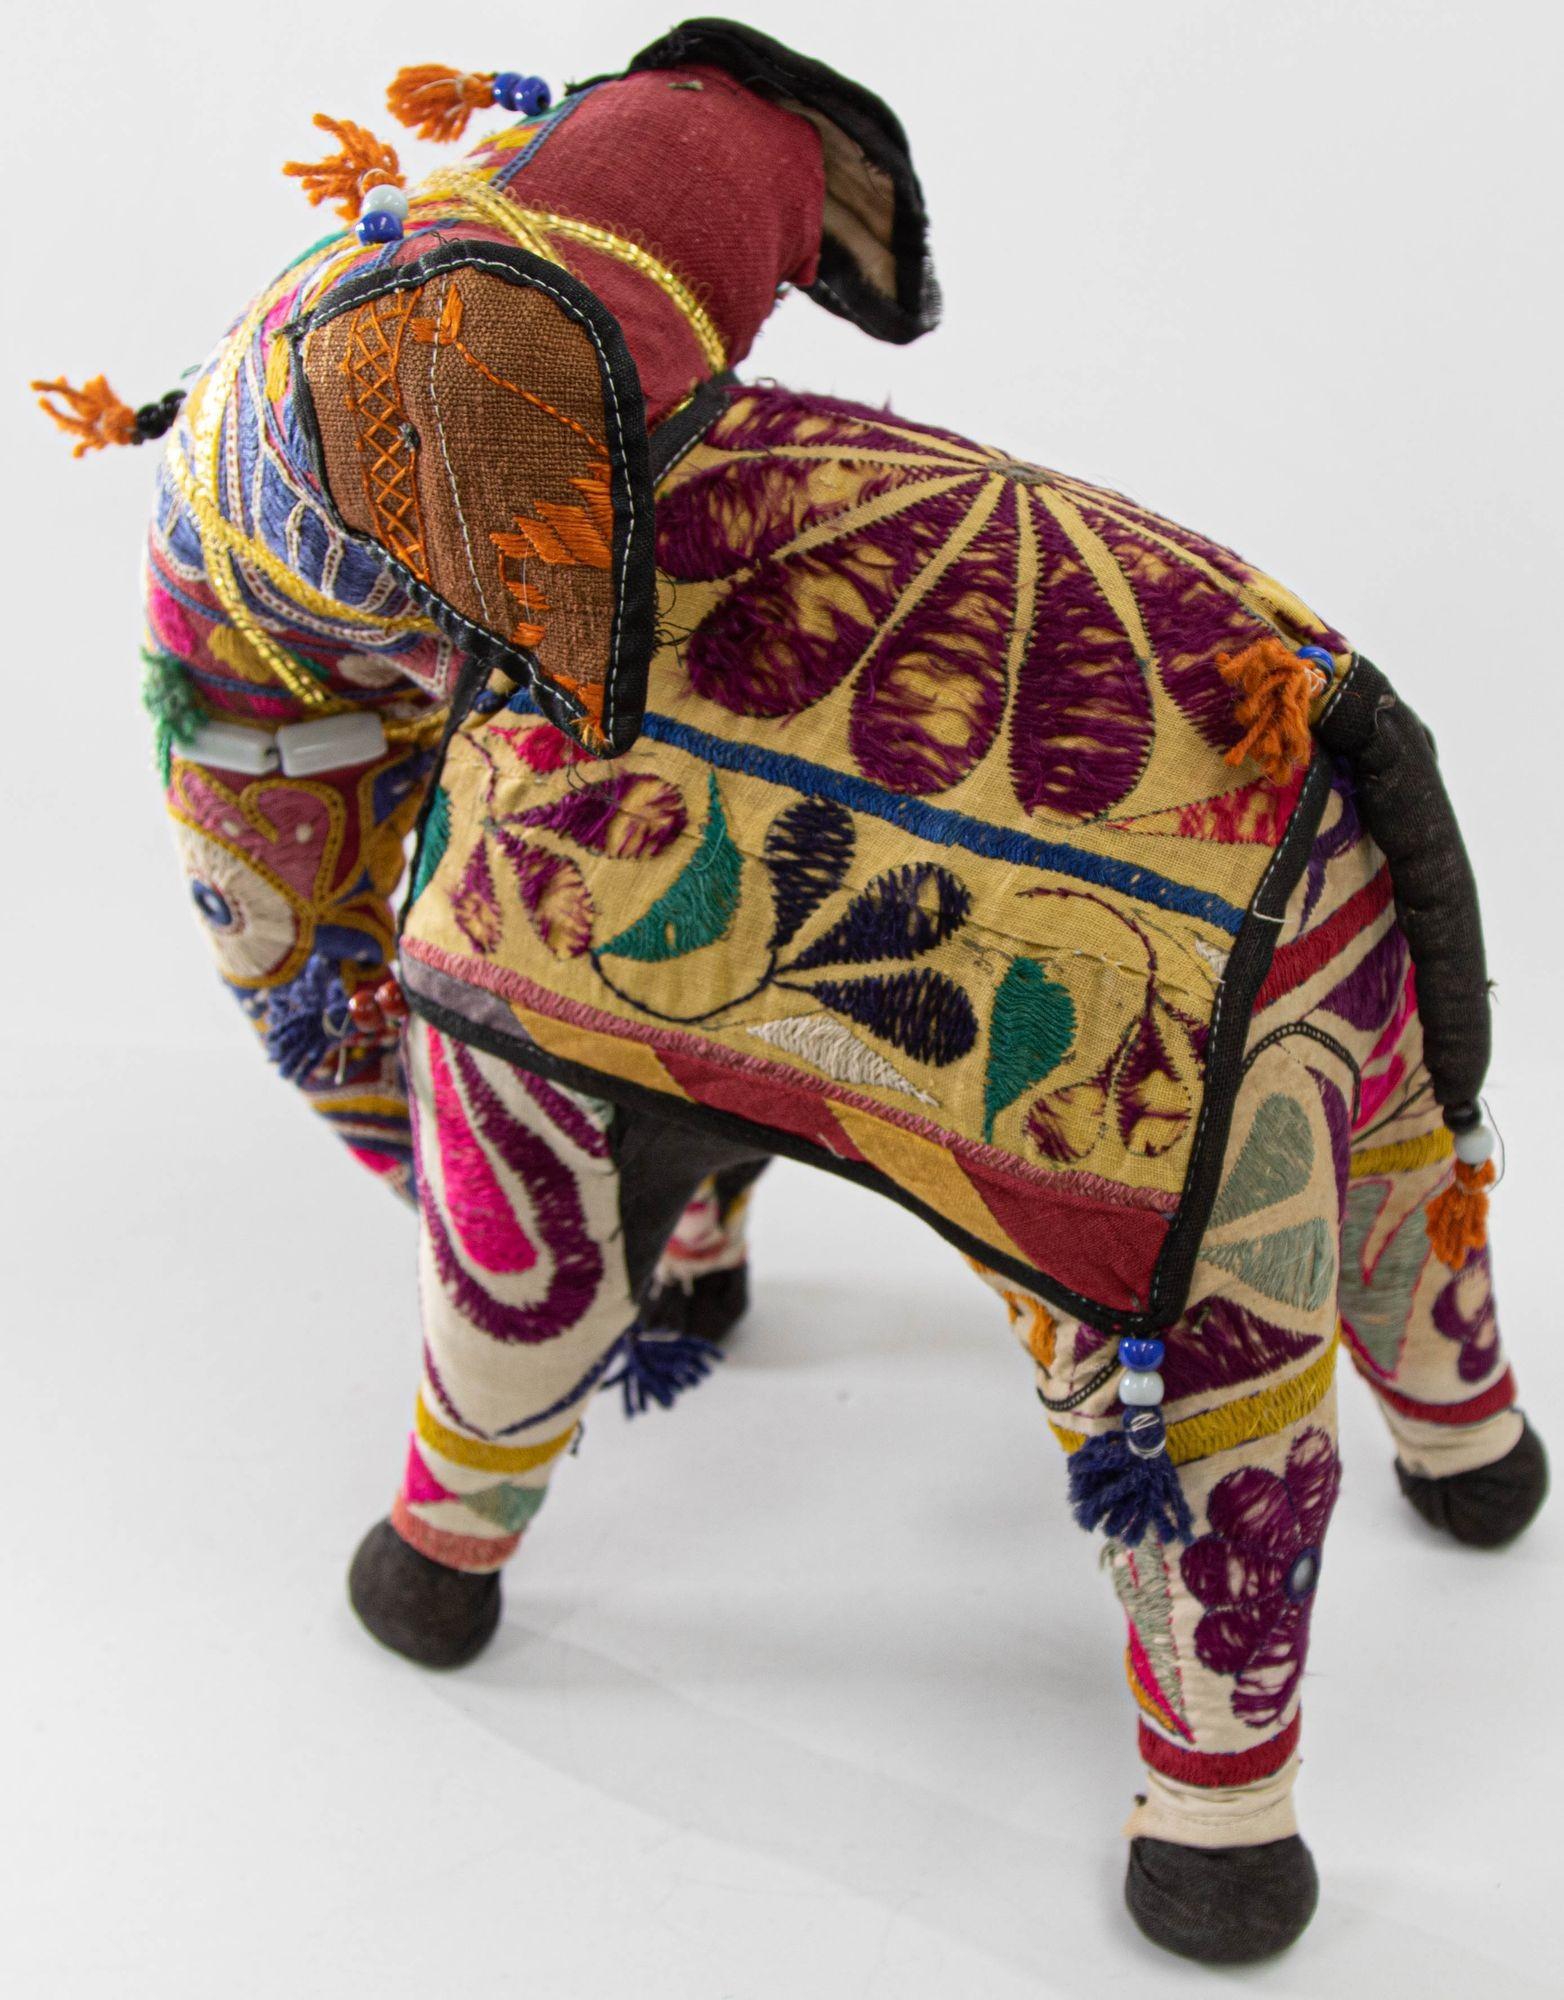 Vintage Handcrafted Stuffed Cotton Embroidered Ceremonial Elephant Toy Raj India en vente 9